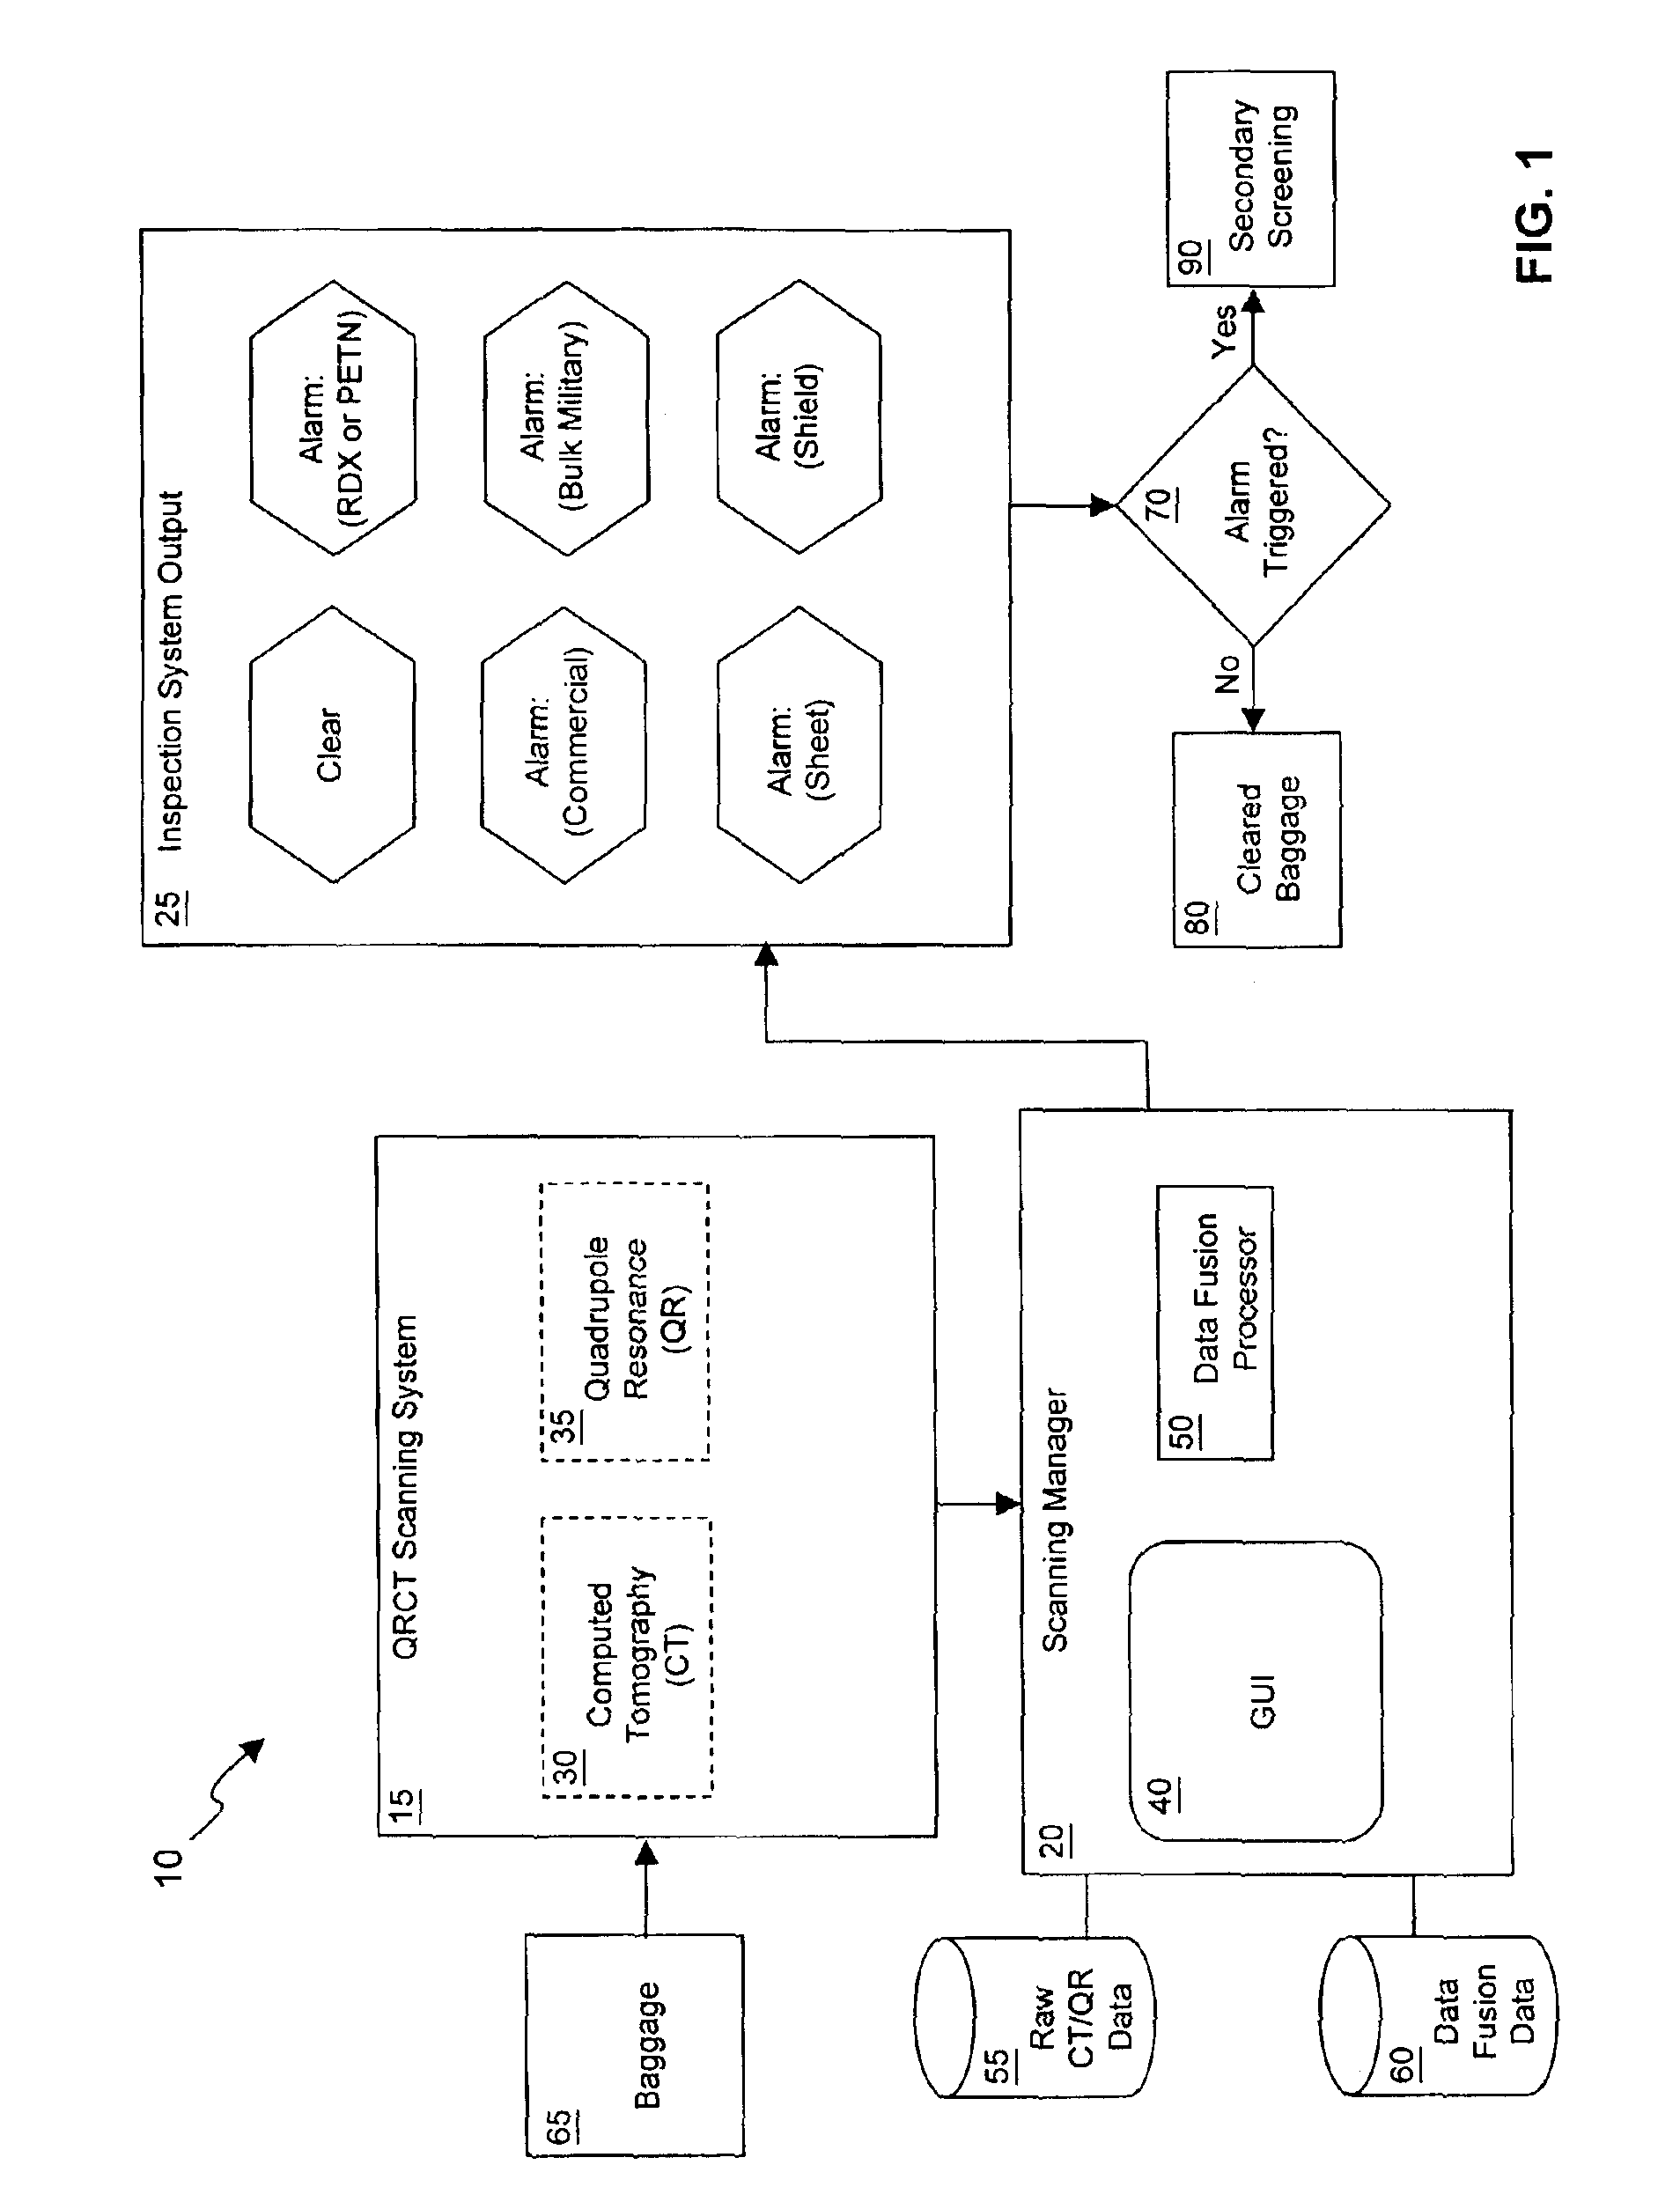 Explosives detection system using computed tomography (CT) and quadrupole resonance (QR) sensors